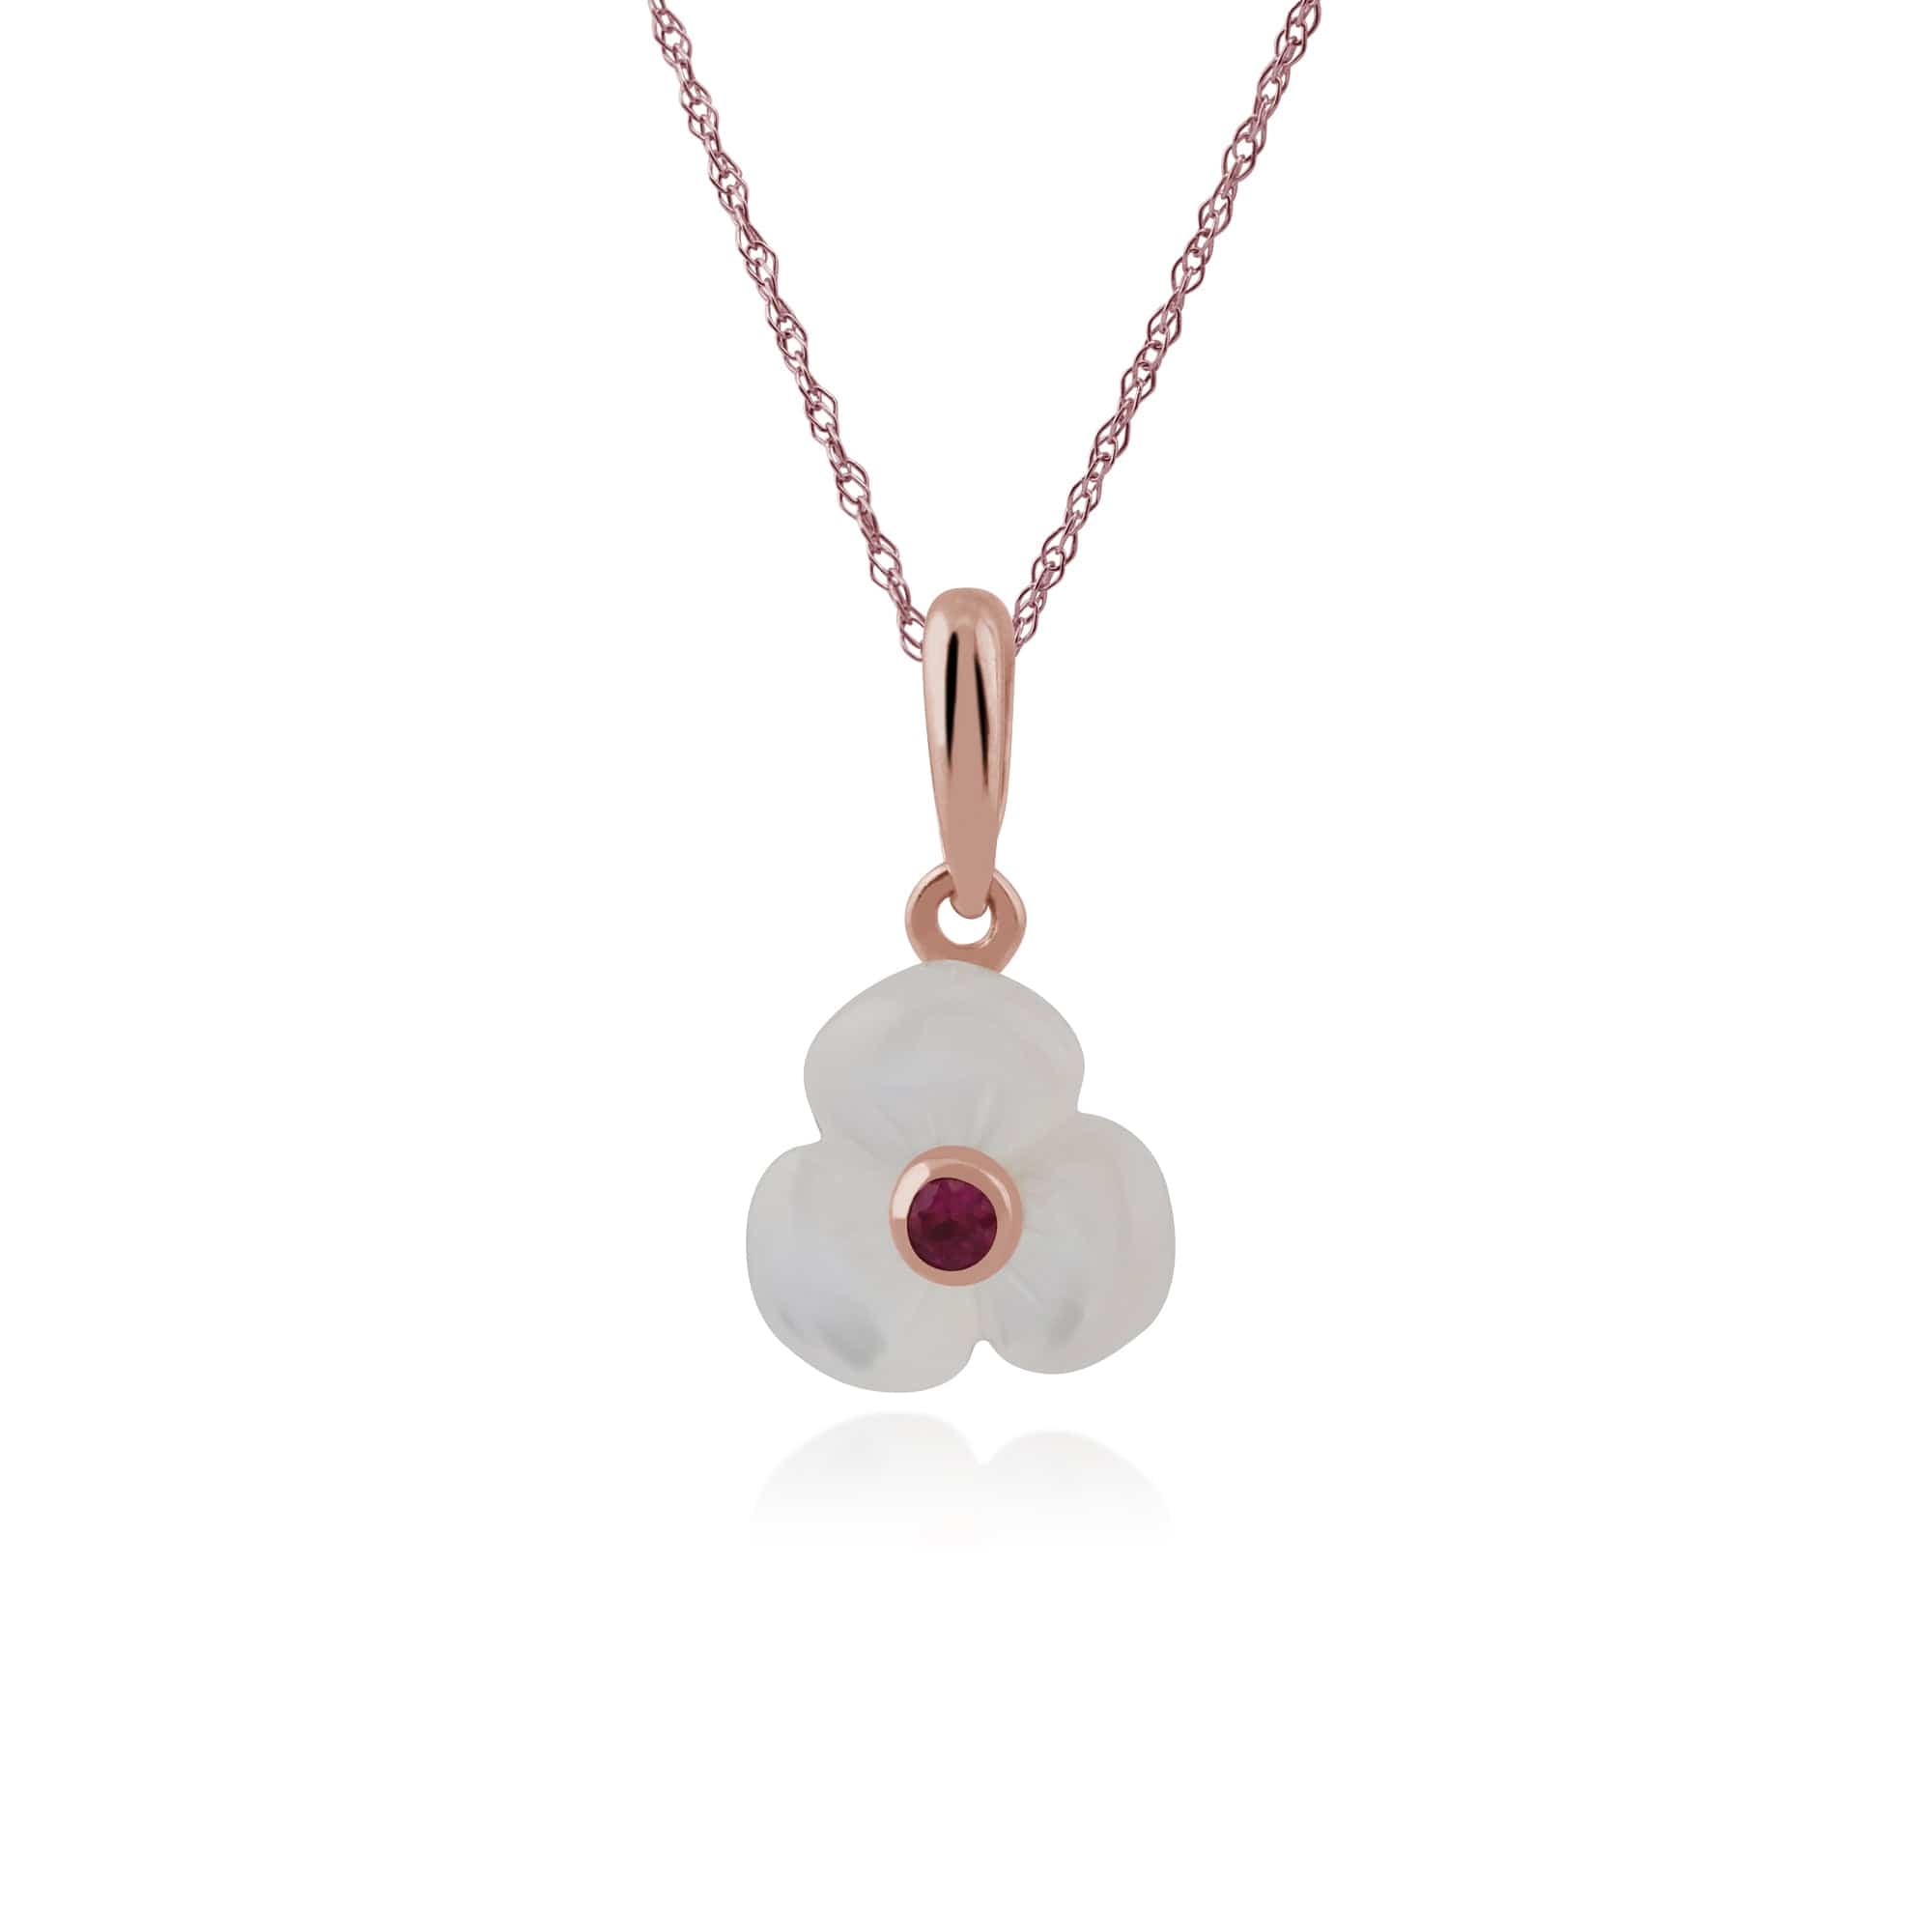 Floral Round Ruby & Mother of Pearl Daisy Stud Earrings & Pendant Set in Rose Gold Plated 925 Sterling Silver - Gemondo